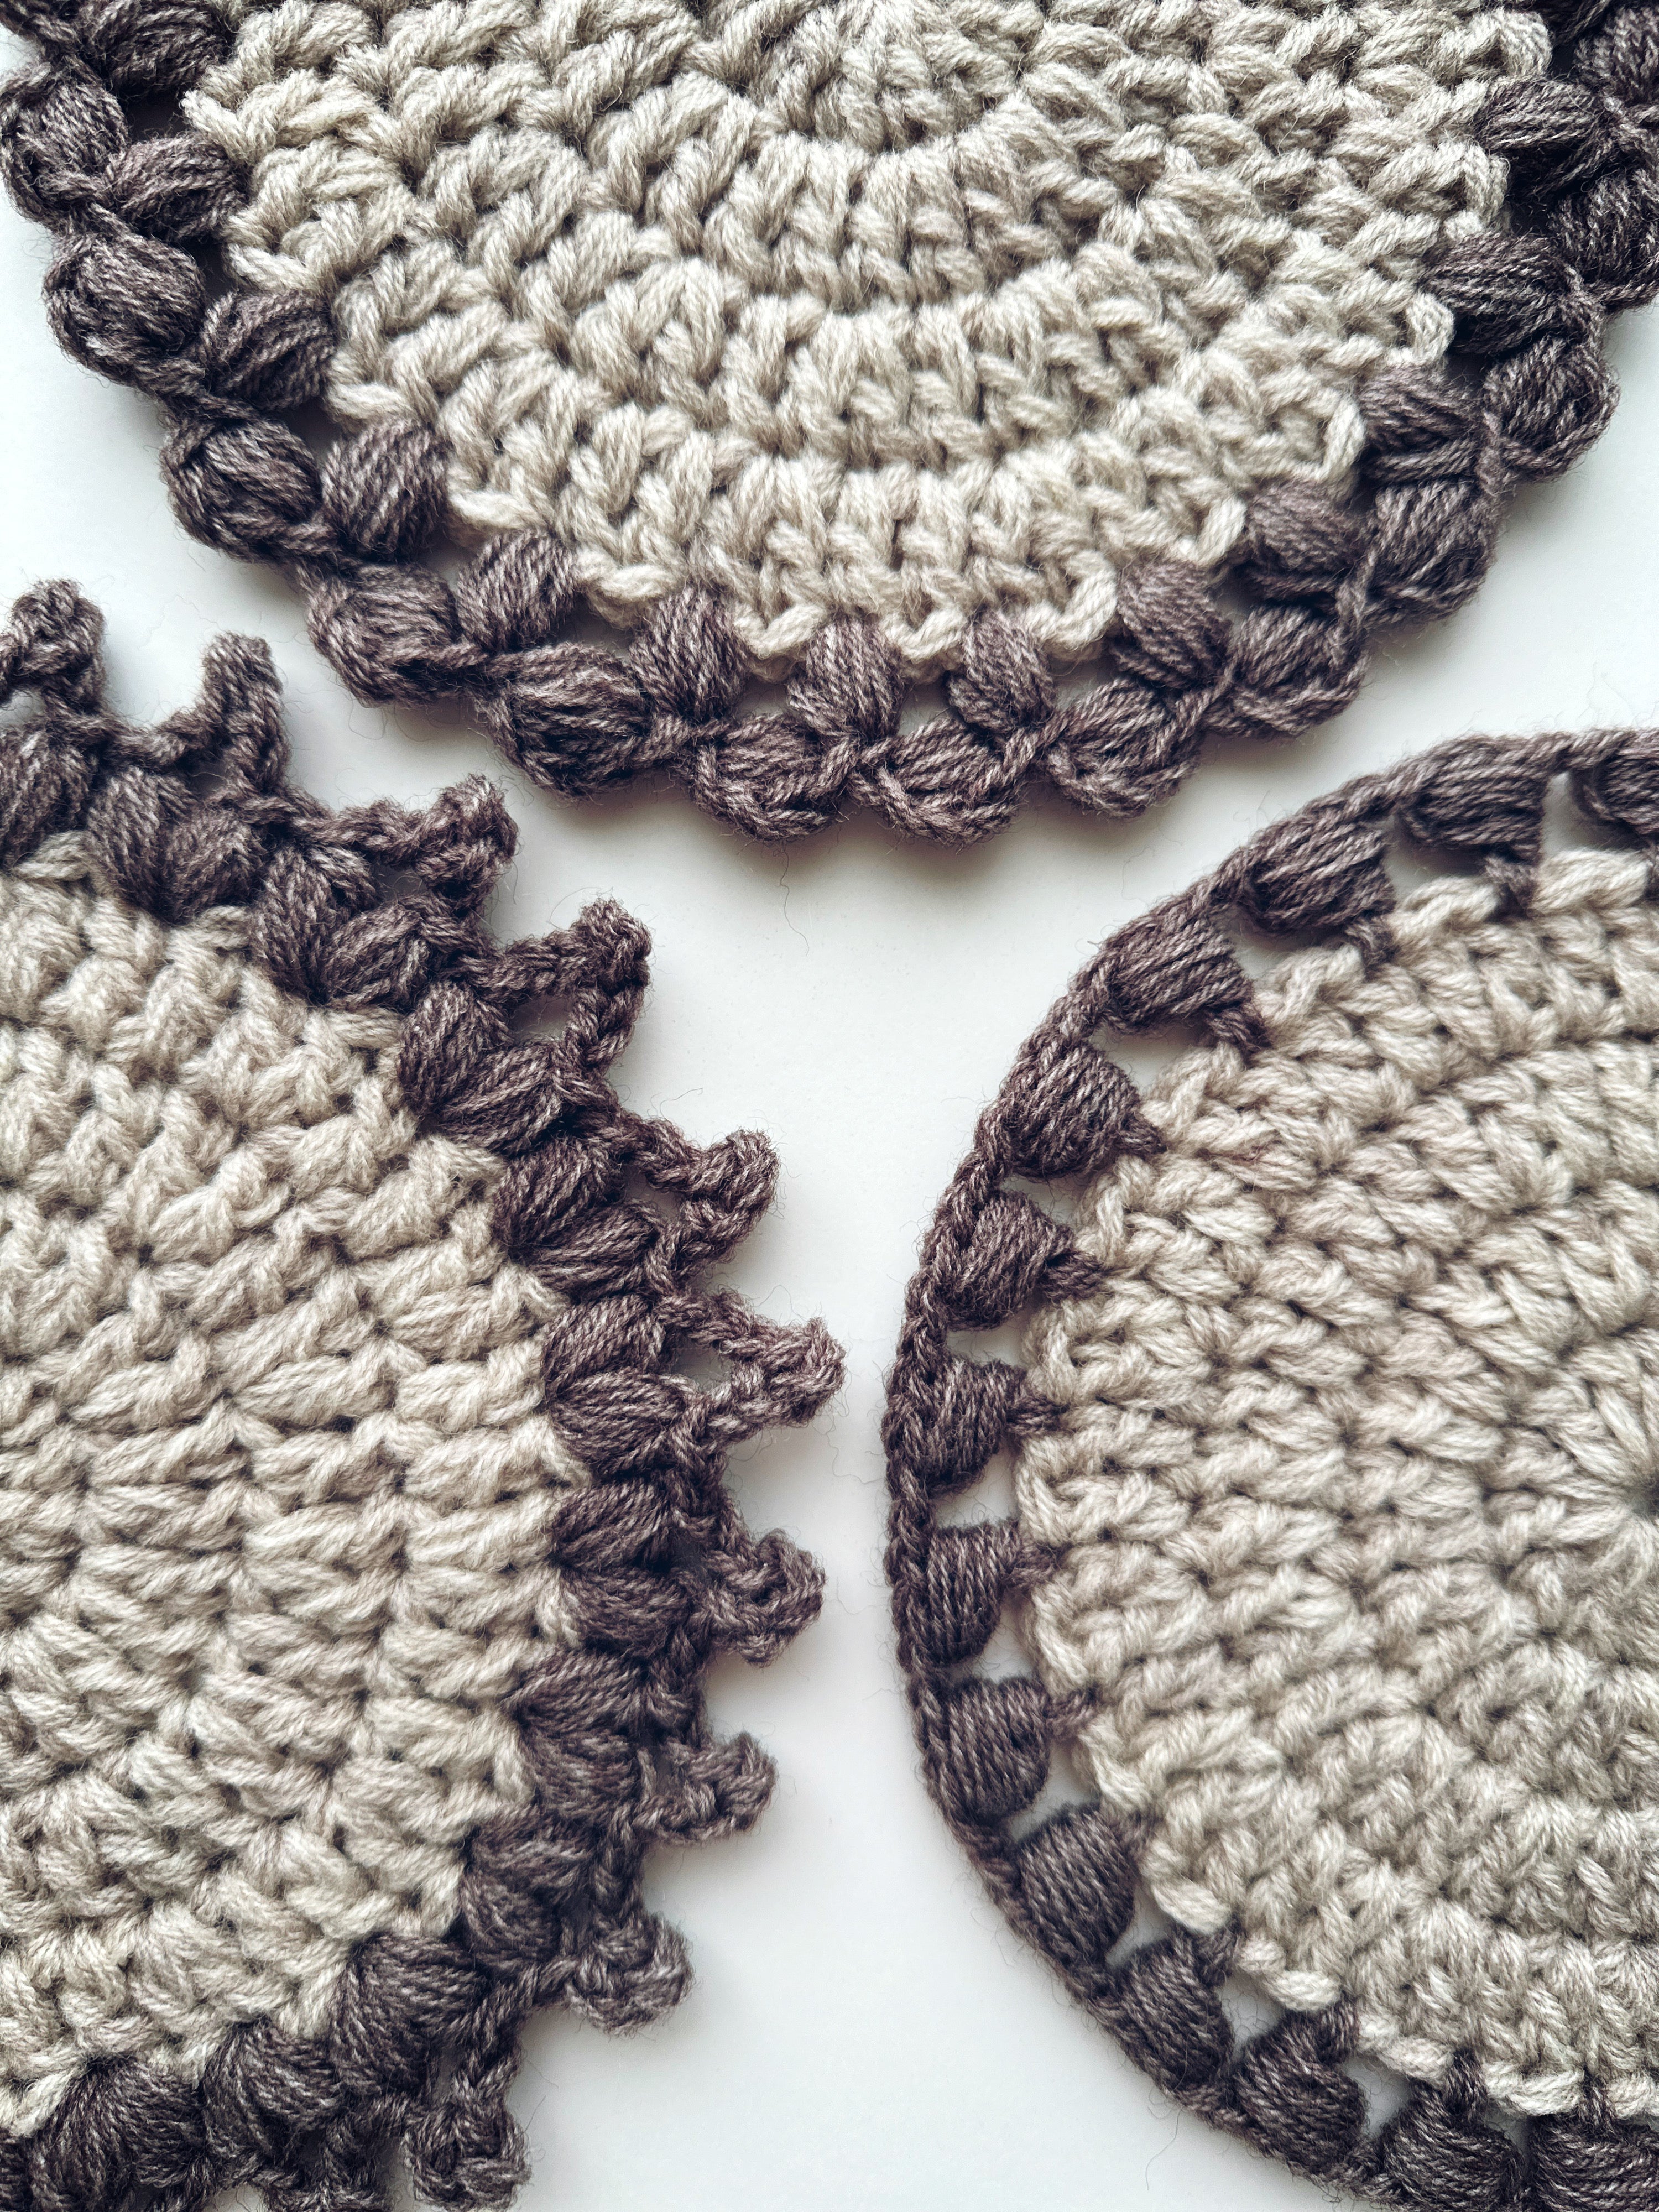 How To Crochet a Flat Circle Coaster (US Terms)